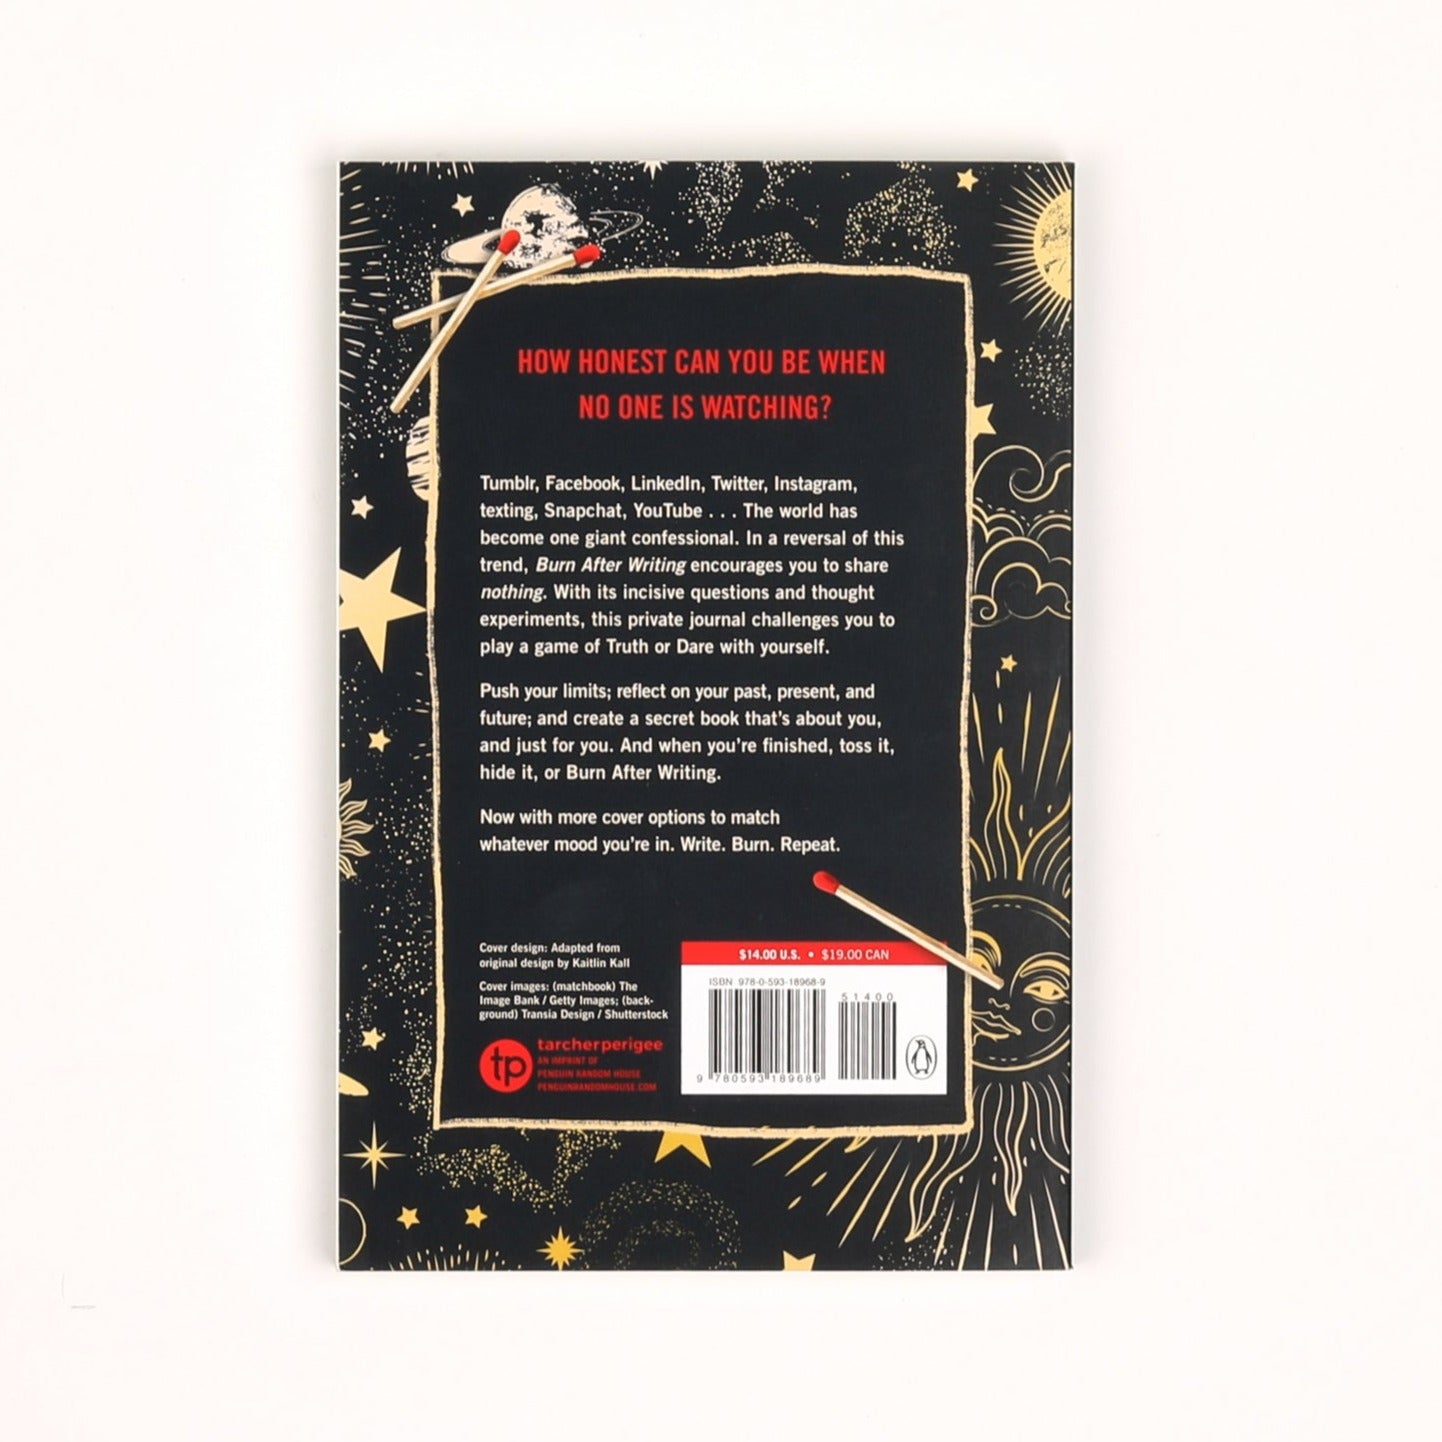 Back cover of Burn After Writing (Celestial) photographed on white background.